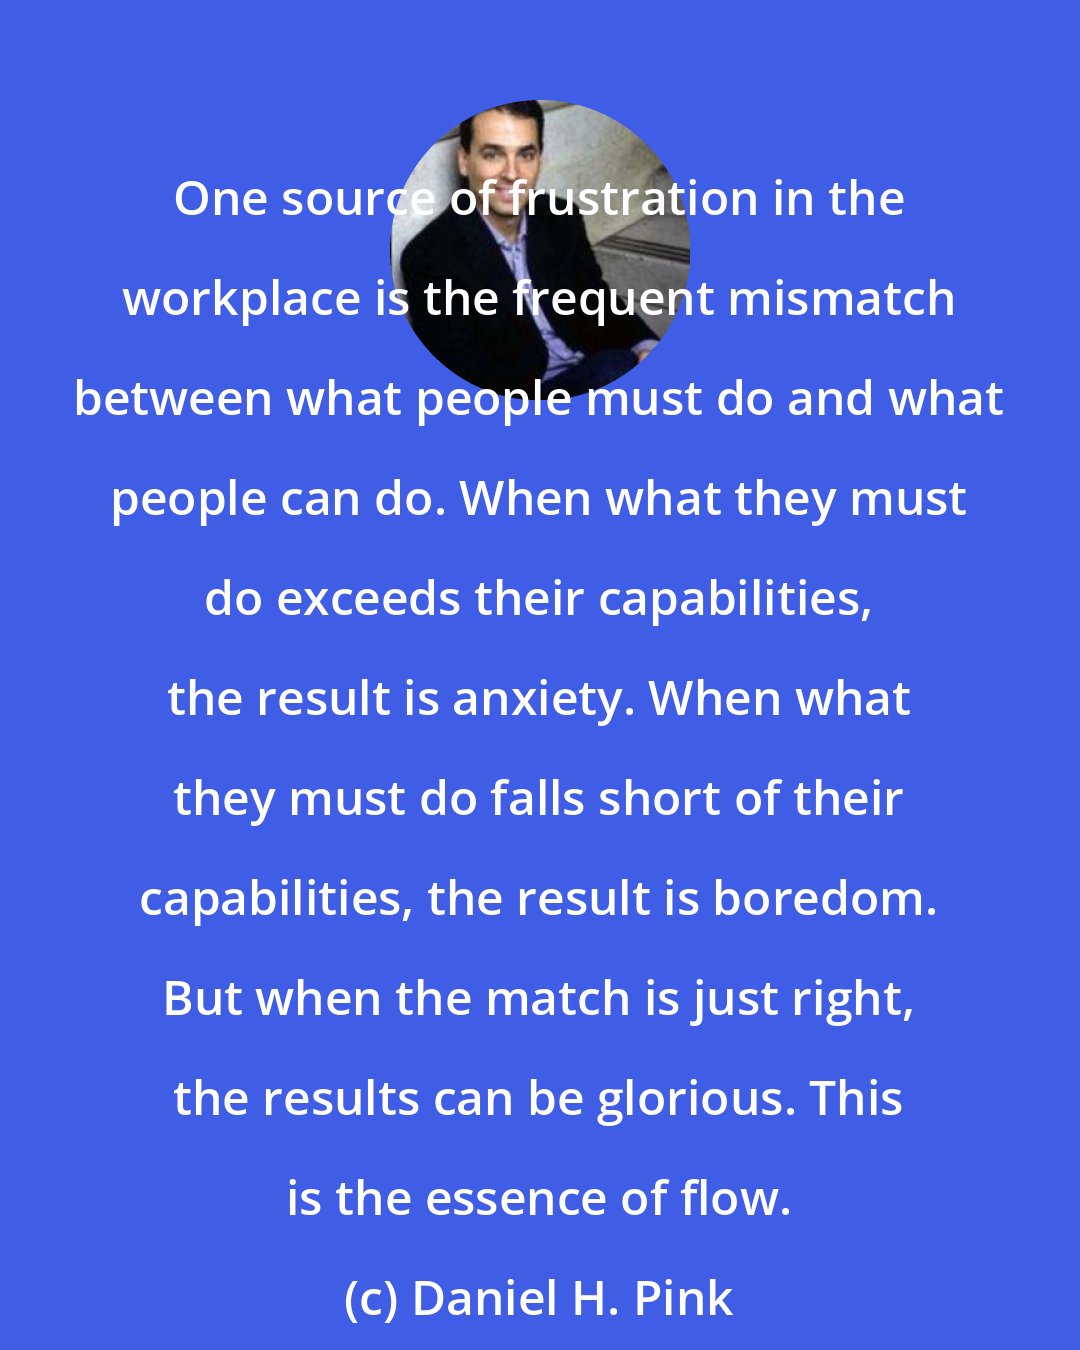 Daniel H. Pink: One source of frustration in the workplace is the frequent mismatch between what people must do and what people can do. When what they must do exceeds their capabilities, the result is anxiety. When what they must do falls short of their capabilities, the result is boredom. But when the match is just right, the results can be glorious. This is the essence of flow.